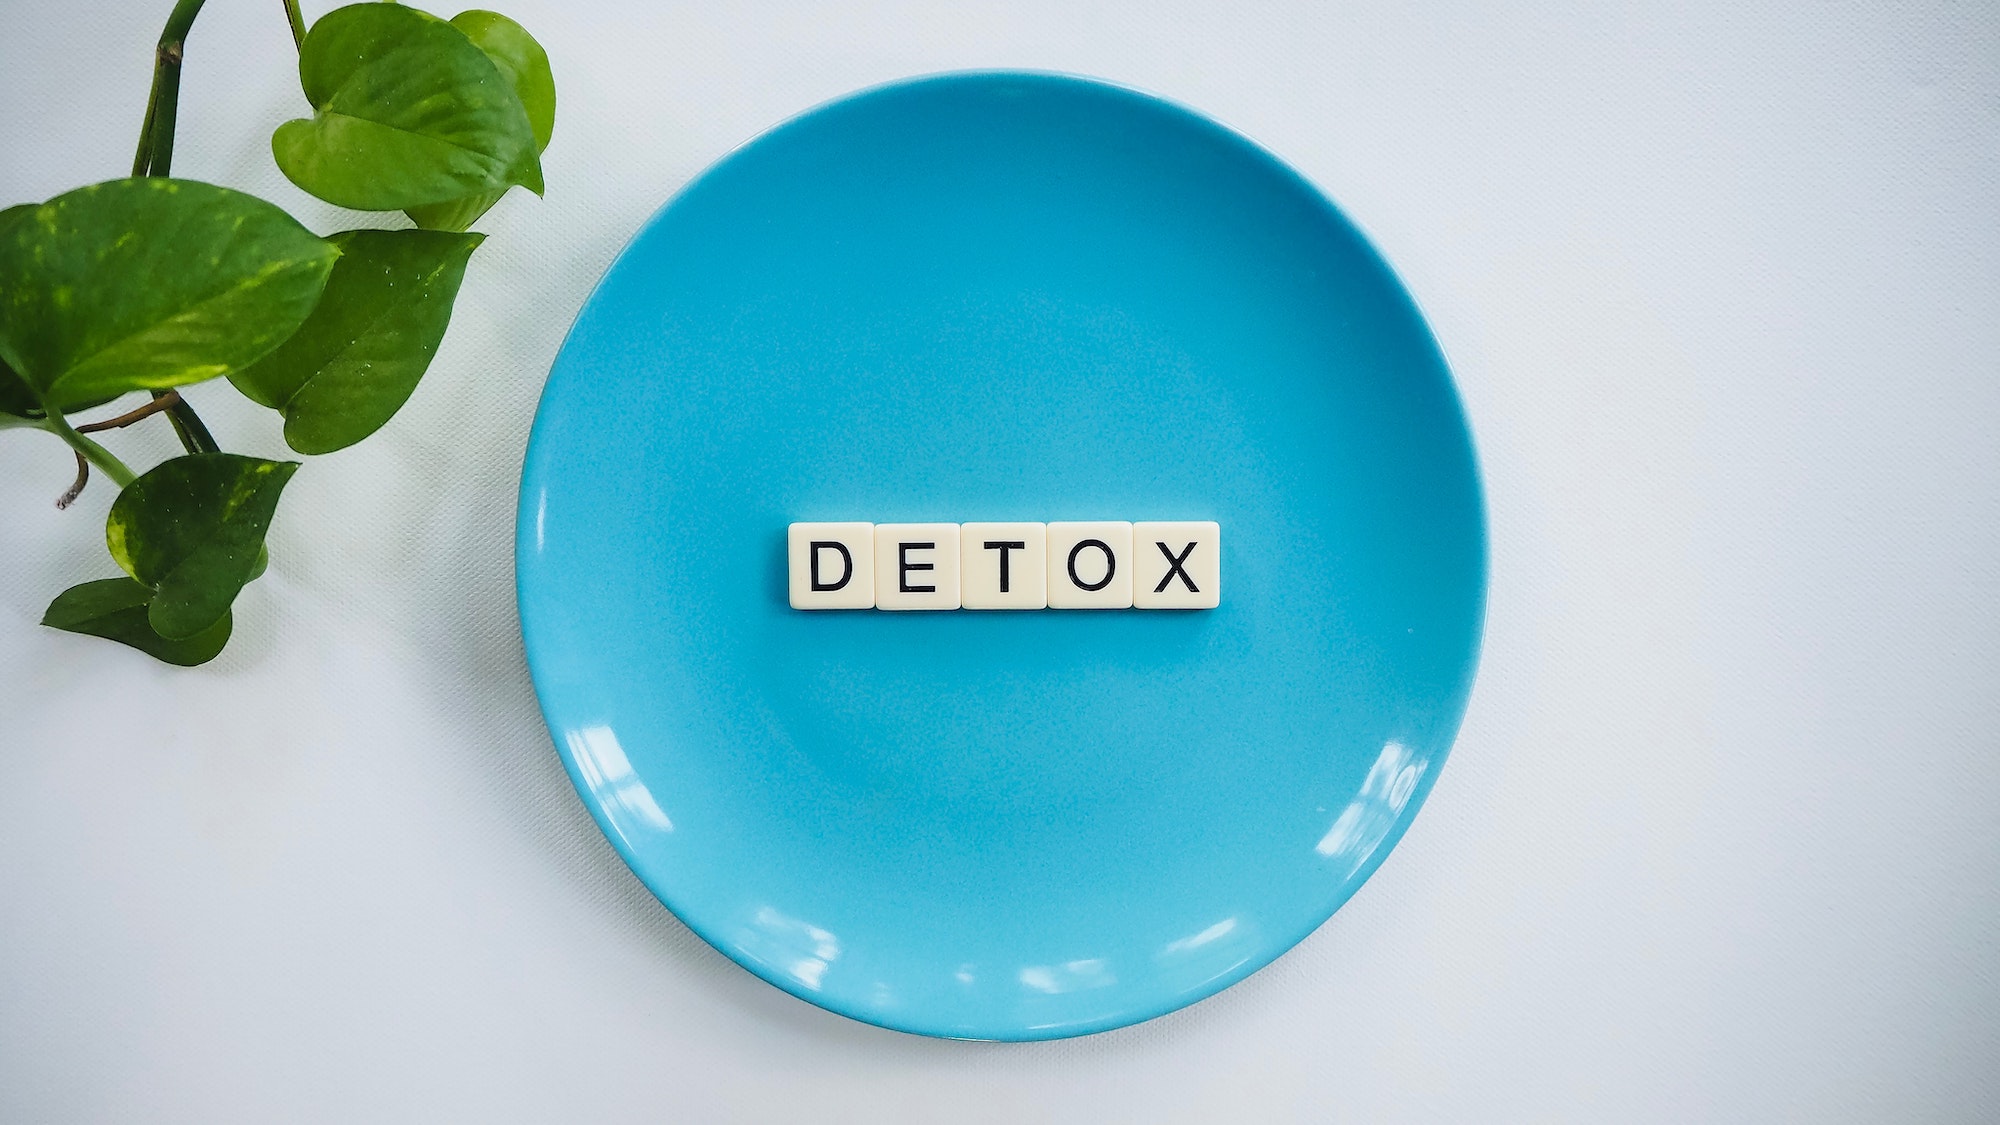 detox letters on a blue plate